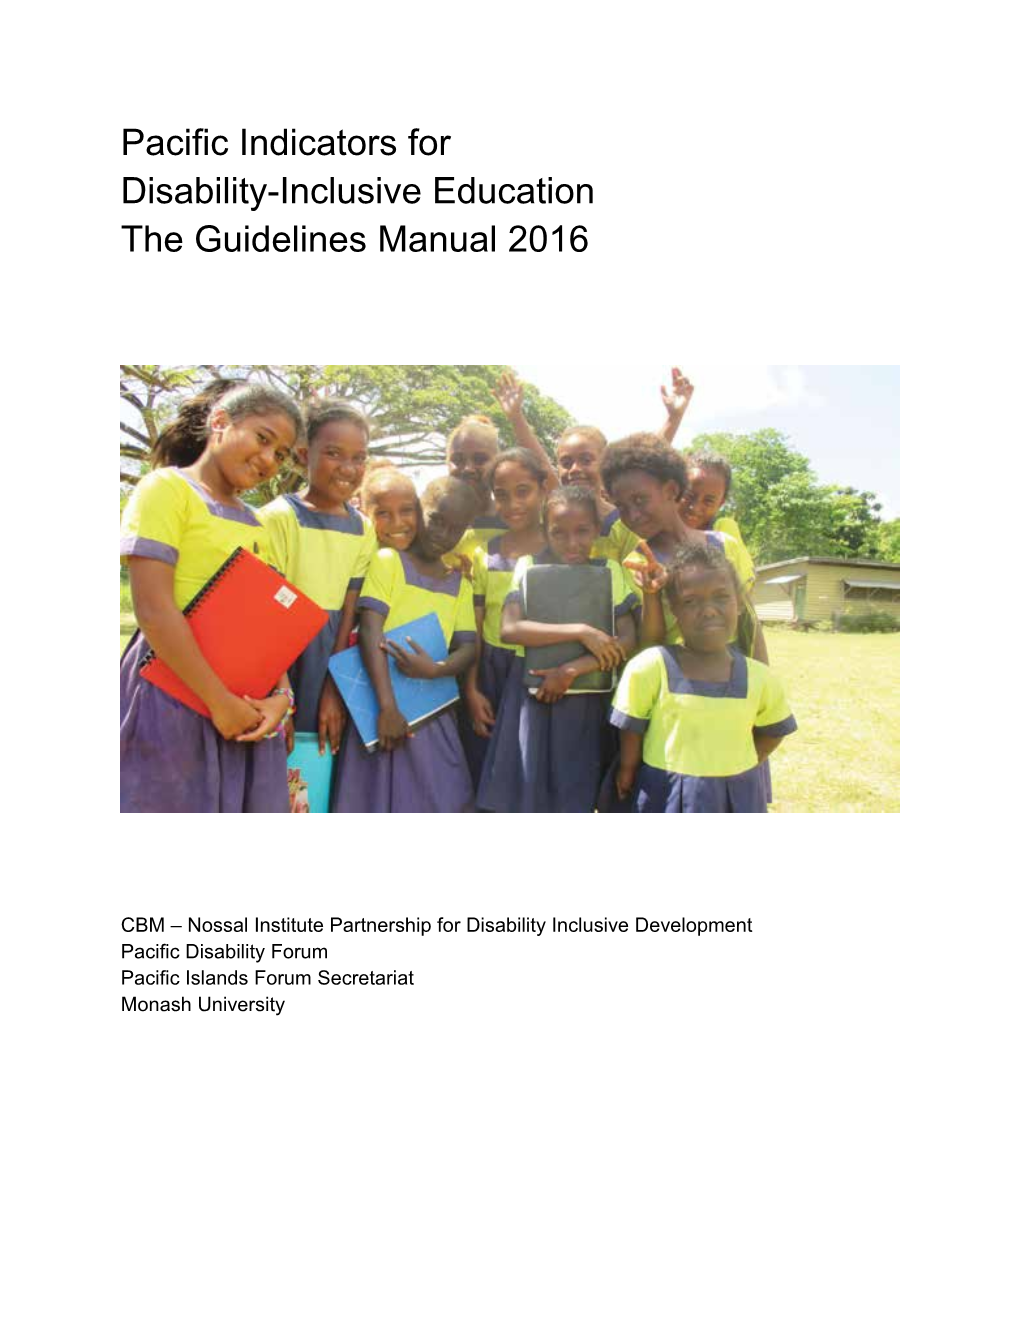 Pacific Indicators for Disability-Inclusive Education the Guidelines Manual 2016